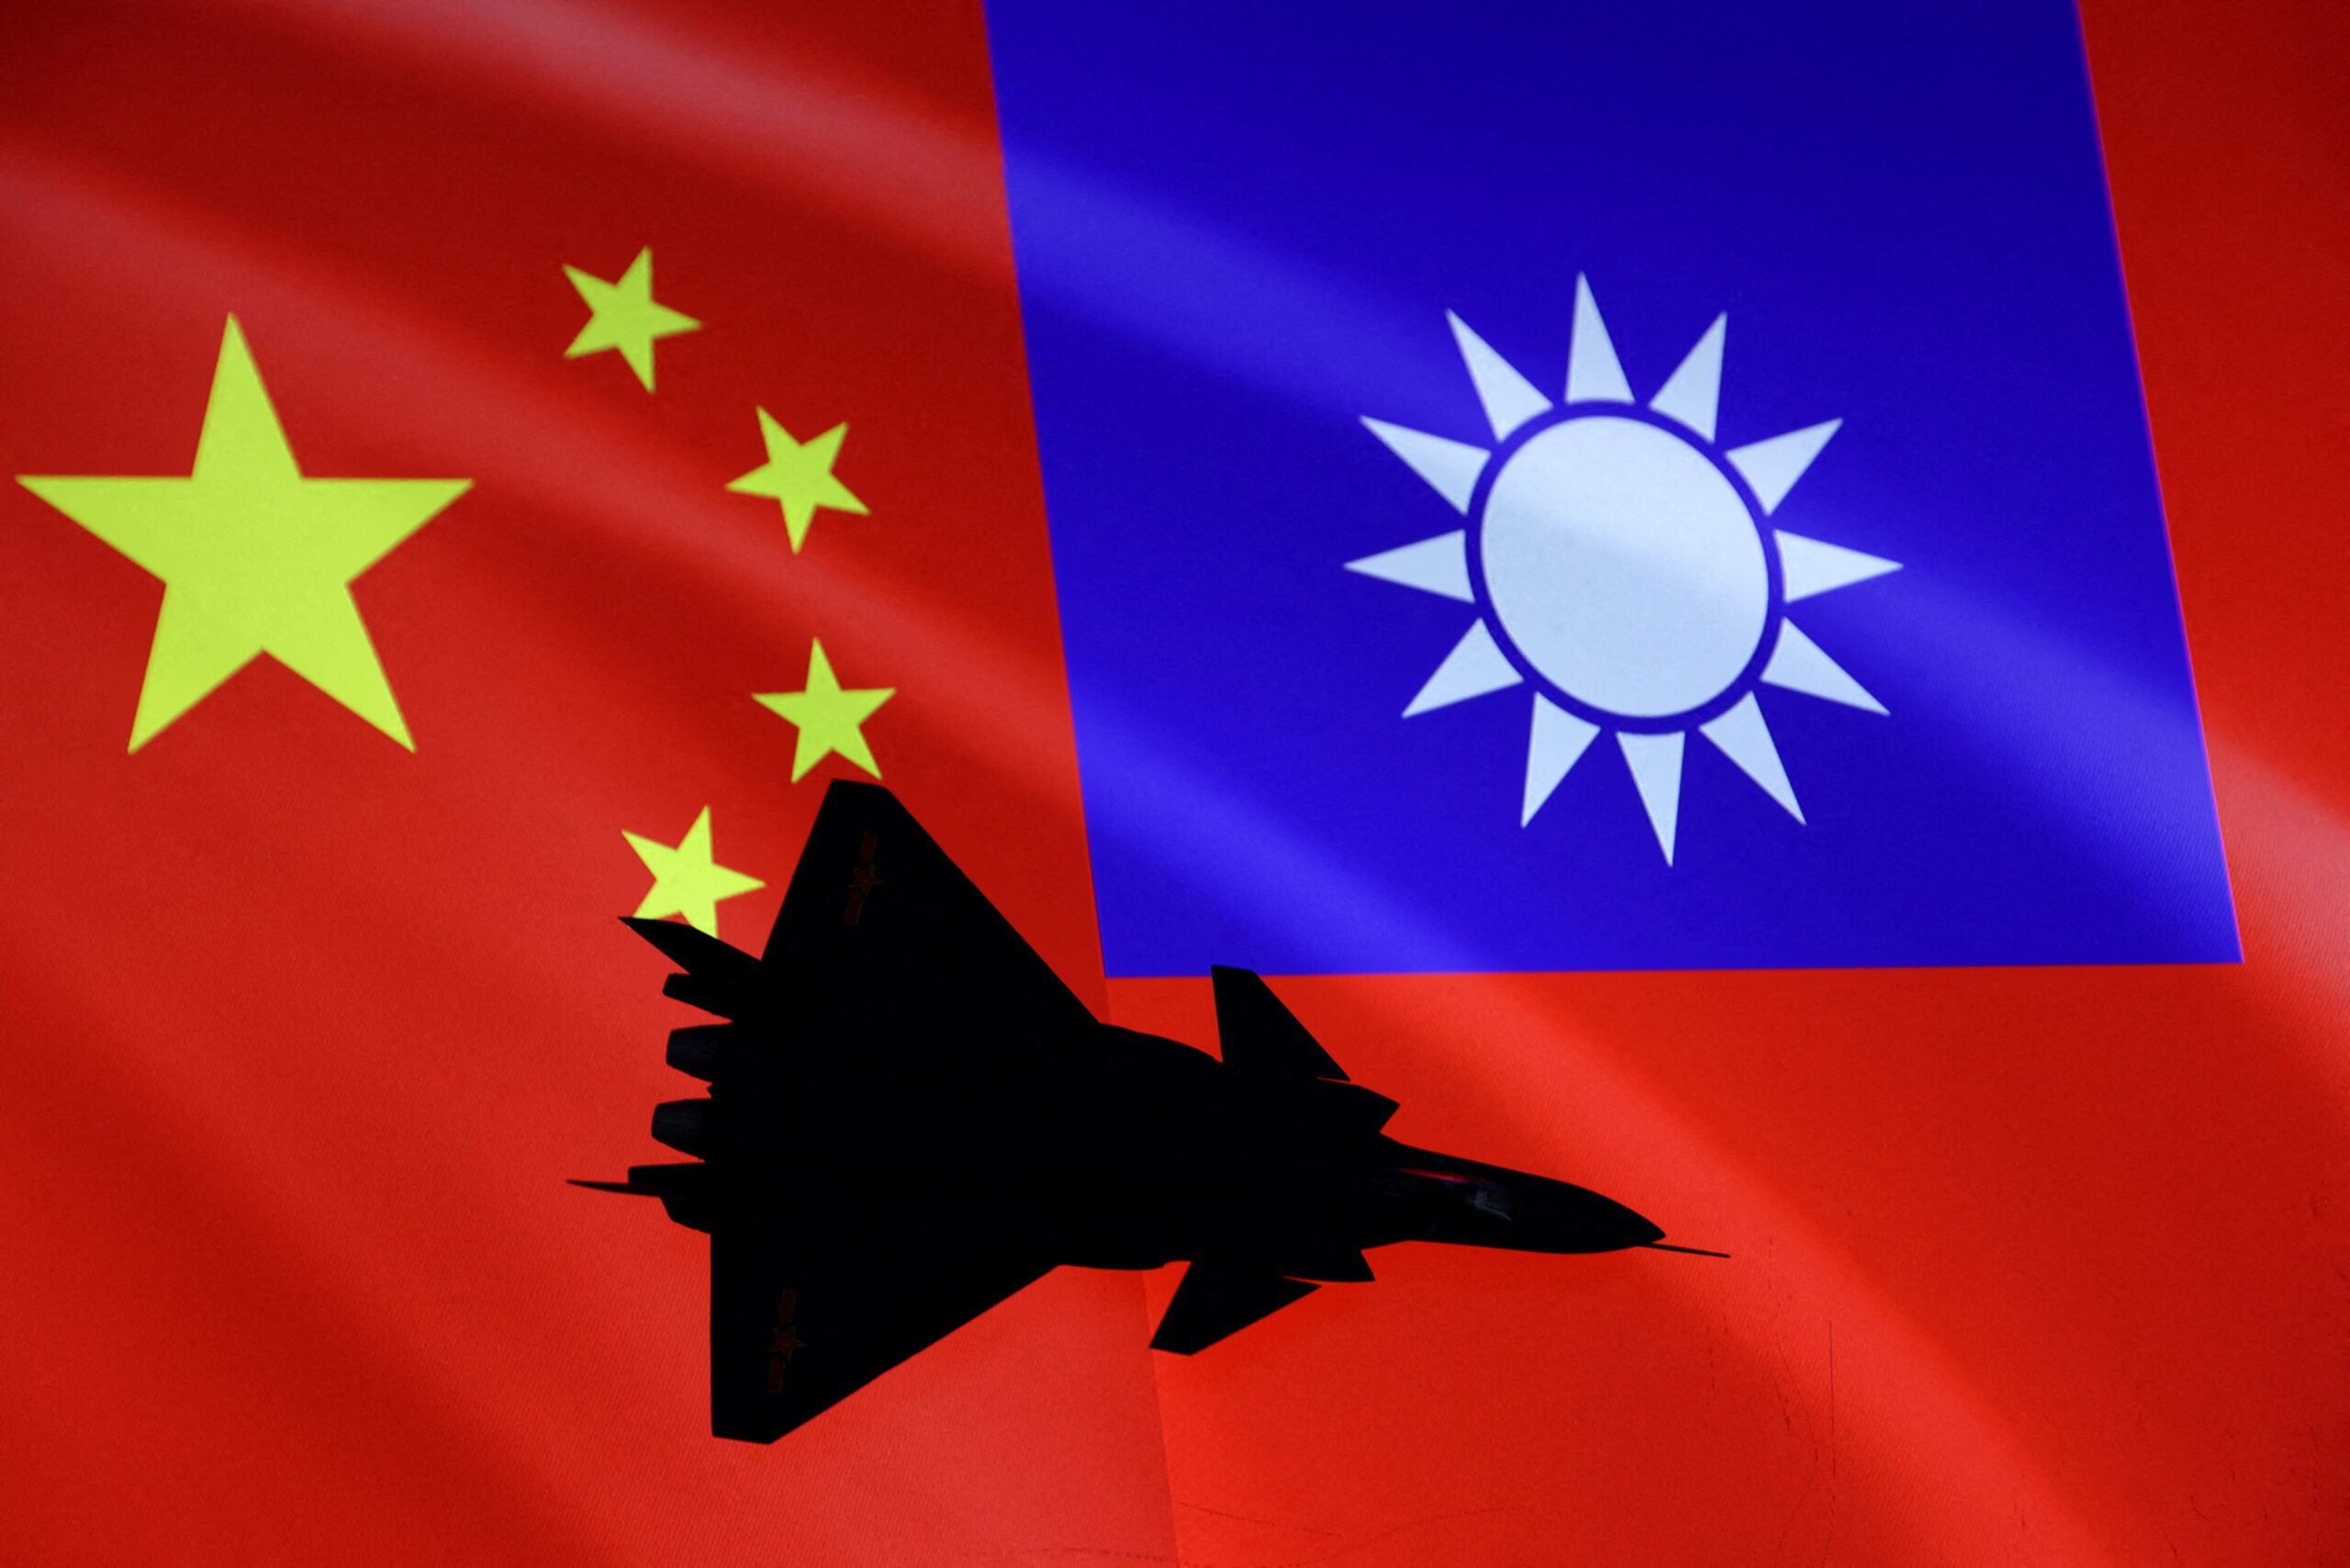 Taiwan reports renewed Chinese military activity, planes in ‘response’ zone